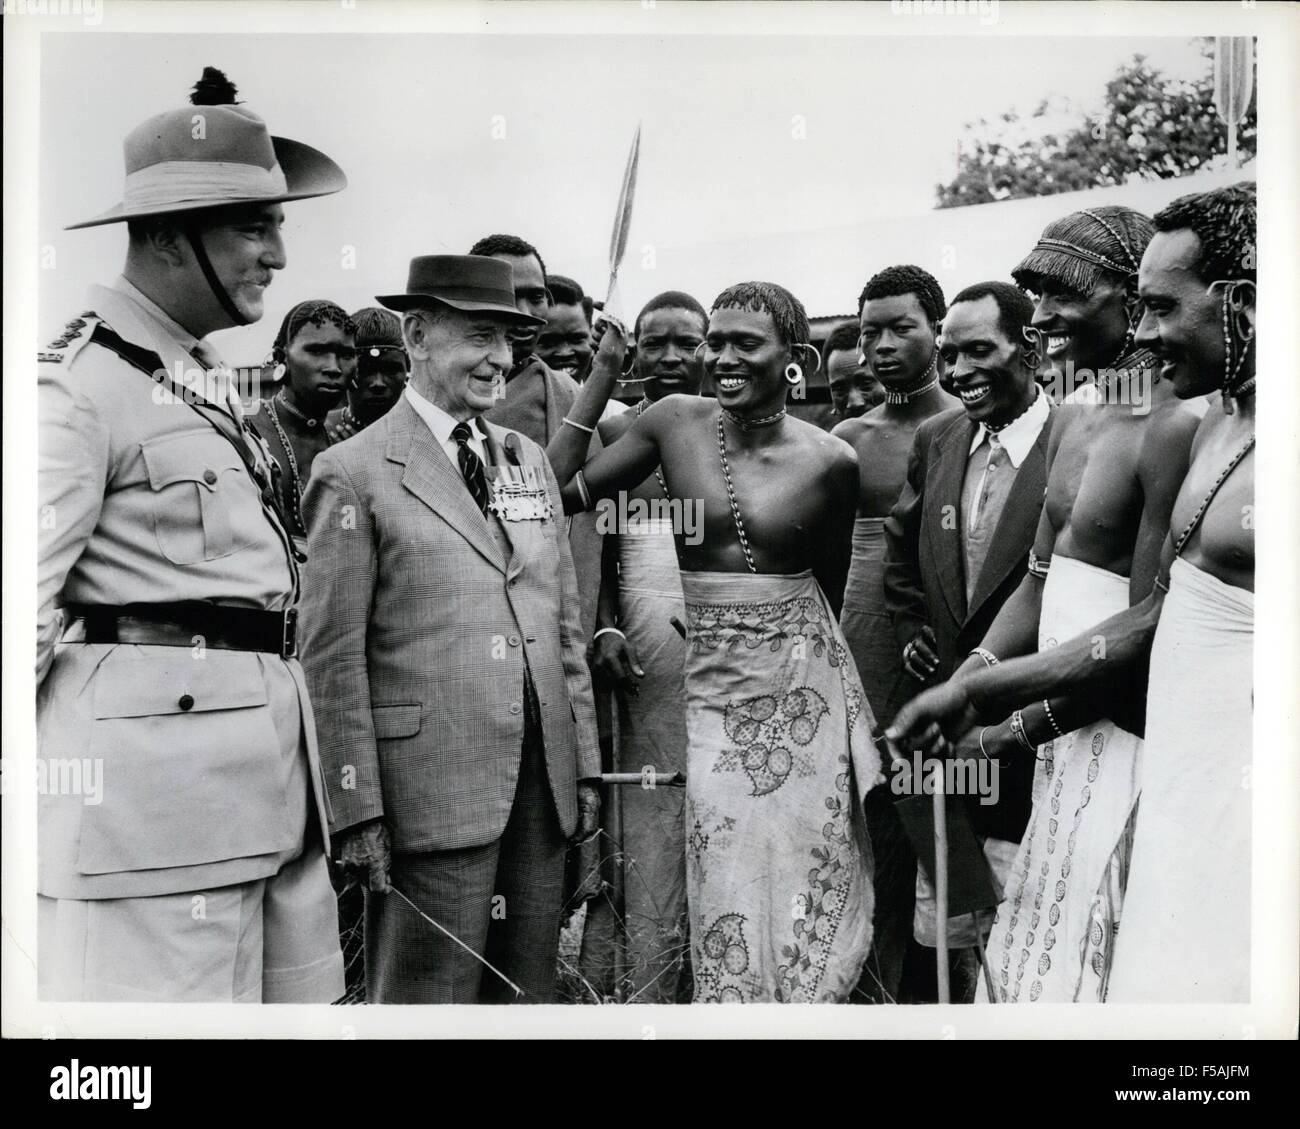 1958 - King African Rifles reunion brings veterans back in tribal dress. Veterans in present day soldiers of the King African Rifles recently held a reunion at Maralal, bordering on the Northern Province, Kenya. Present was 80 years old Colonel T.O. Fitzgerald, a pioneer of the regiment since 1906, made commander of the 3rd King African Rifles in 1915. Picture Shows: Colonel T.O. Fitzgerald with some other veterans of the K.A.R. who came back for the reunion in their Samburu tribal dress. On left is Capt. R.A. Cobbing of the 3rd K.A.R. (Pic issued December, 1958) (Credit Image: © Keyston Stock Photo